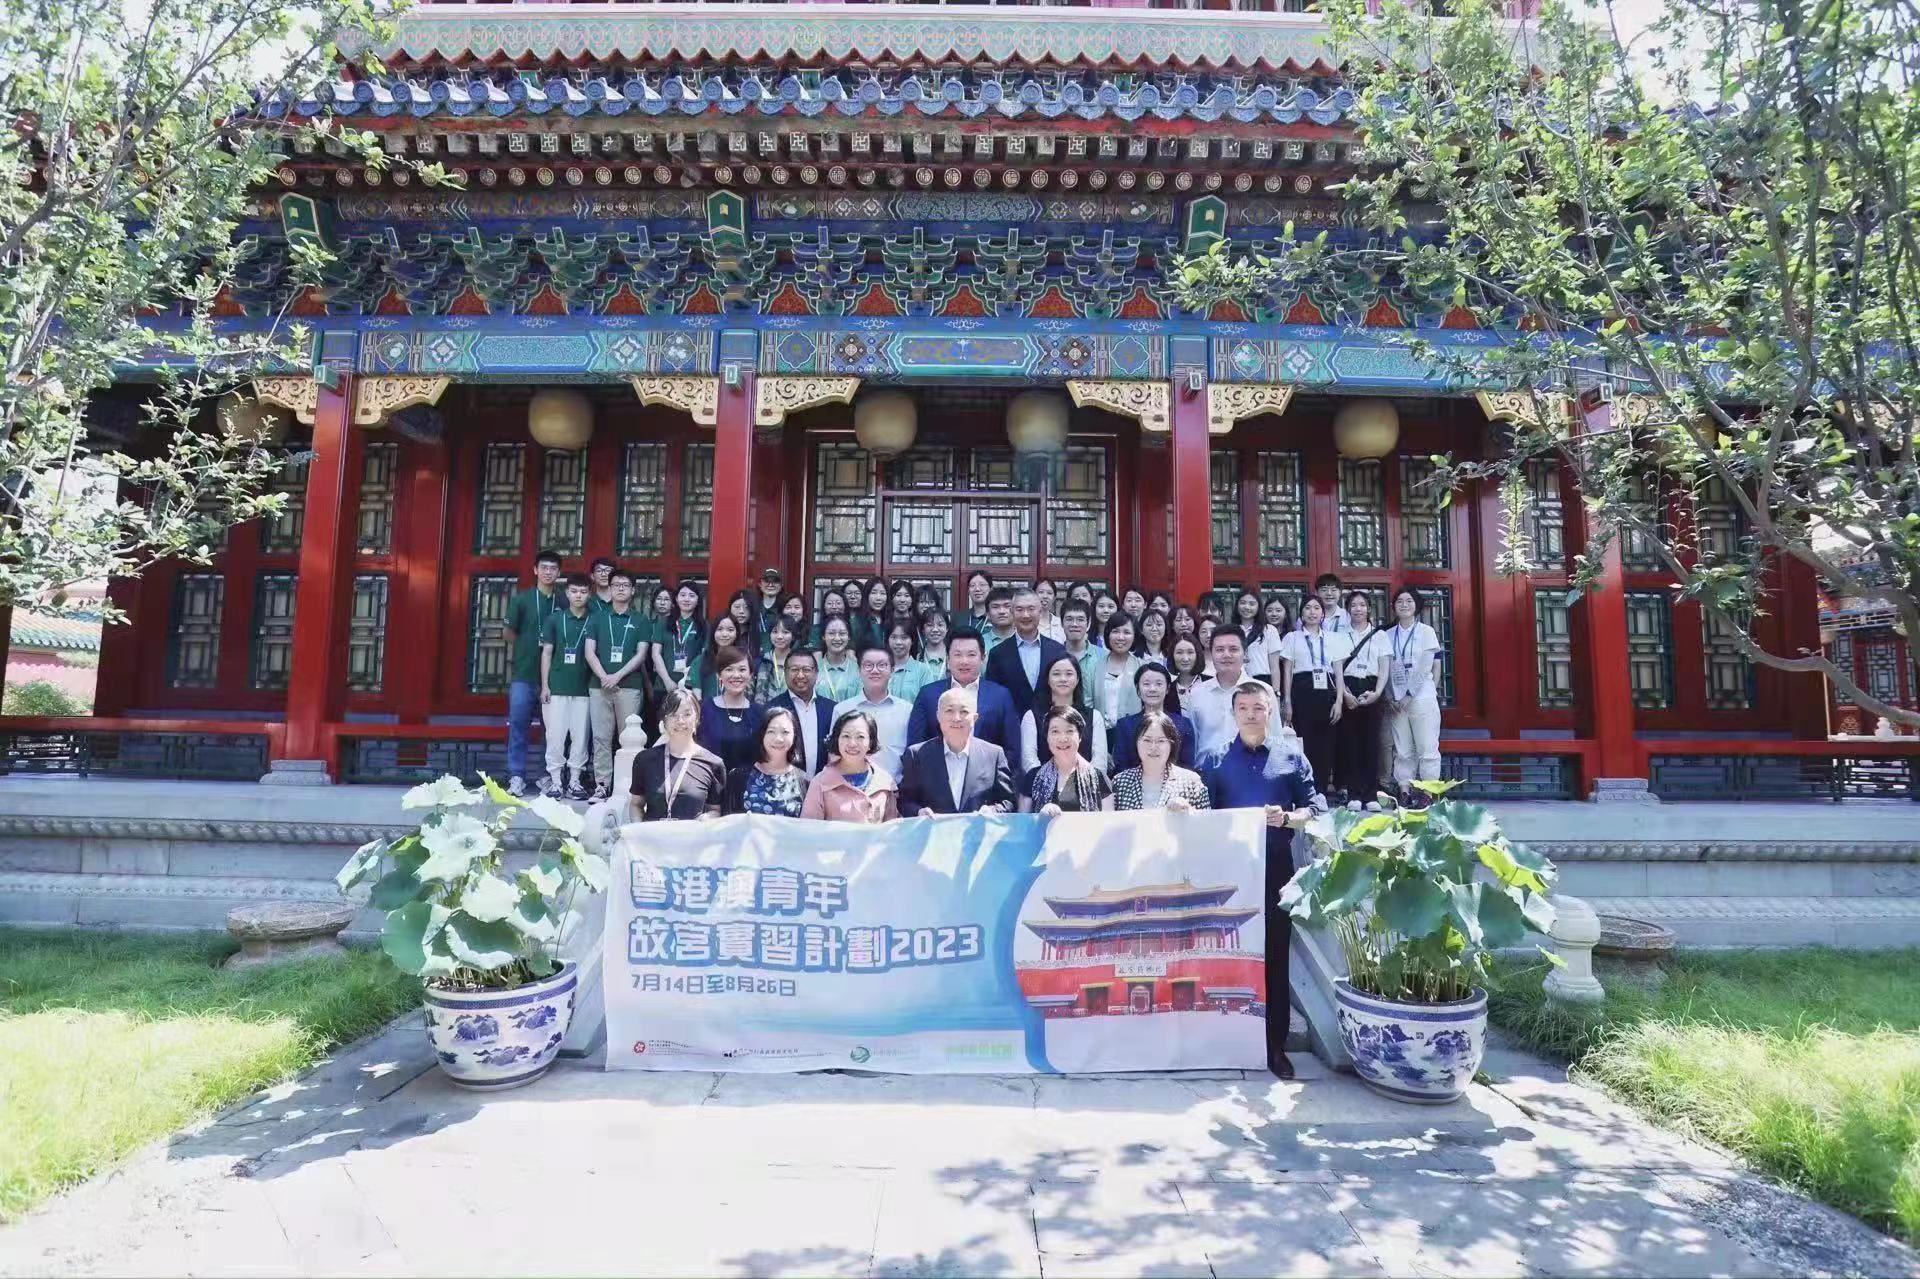 The Secretary for Home and Youth Affairs, Miss Alice Mak, continued her visit in Beijing today (July 17) and arrived at the Palace Museum to officiate at the inauguration ceremony of the Guangdong-Hong Kong-Macao Youth Internship Programme at Palace Museum. Photo shows Miss Mak (first row, third left); the Permanent Secretary for Home and Youth Affairs, Ms Shirley Lam (first row, second left); the Director of the Palace Museum, Dr Wang Xudong (first row, centre), and other guests and interns.
